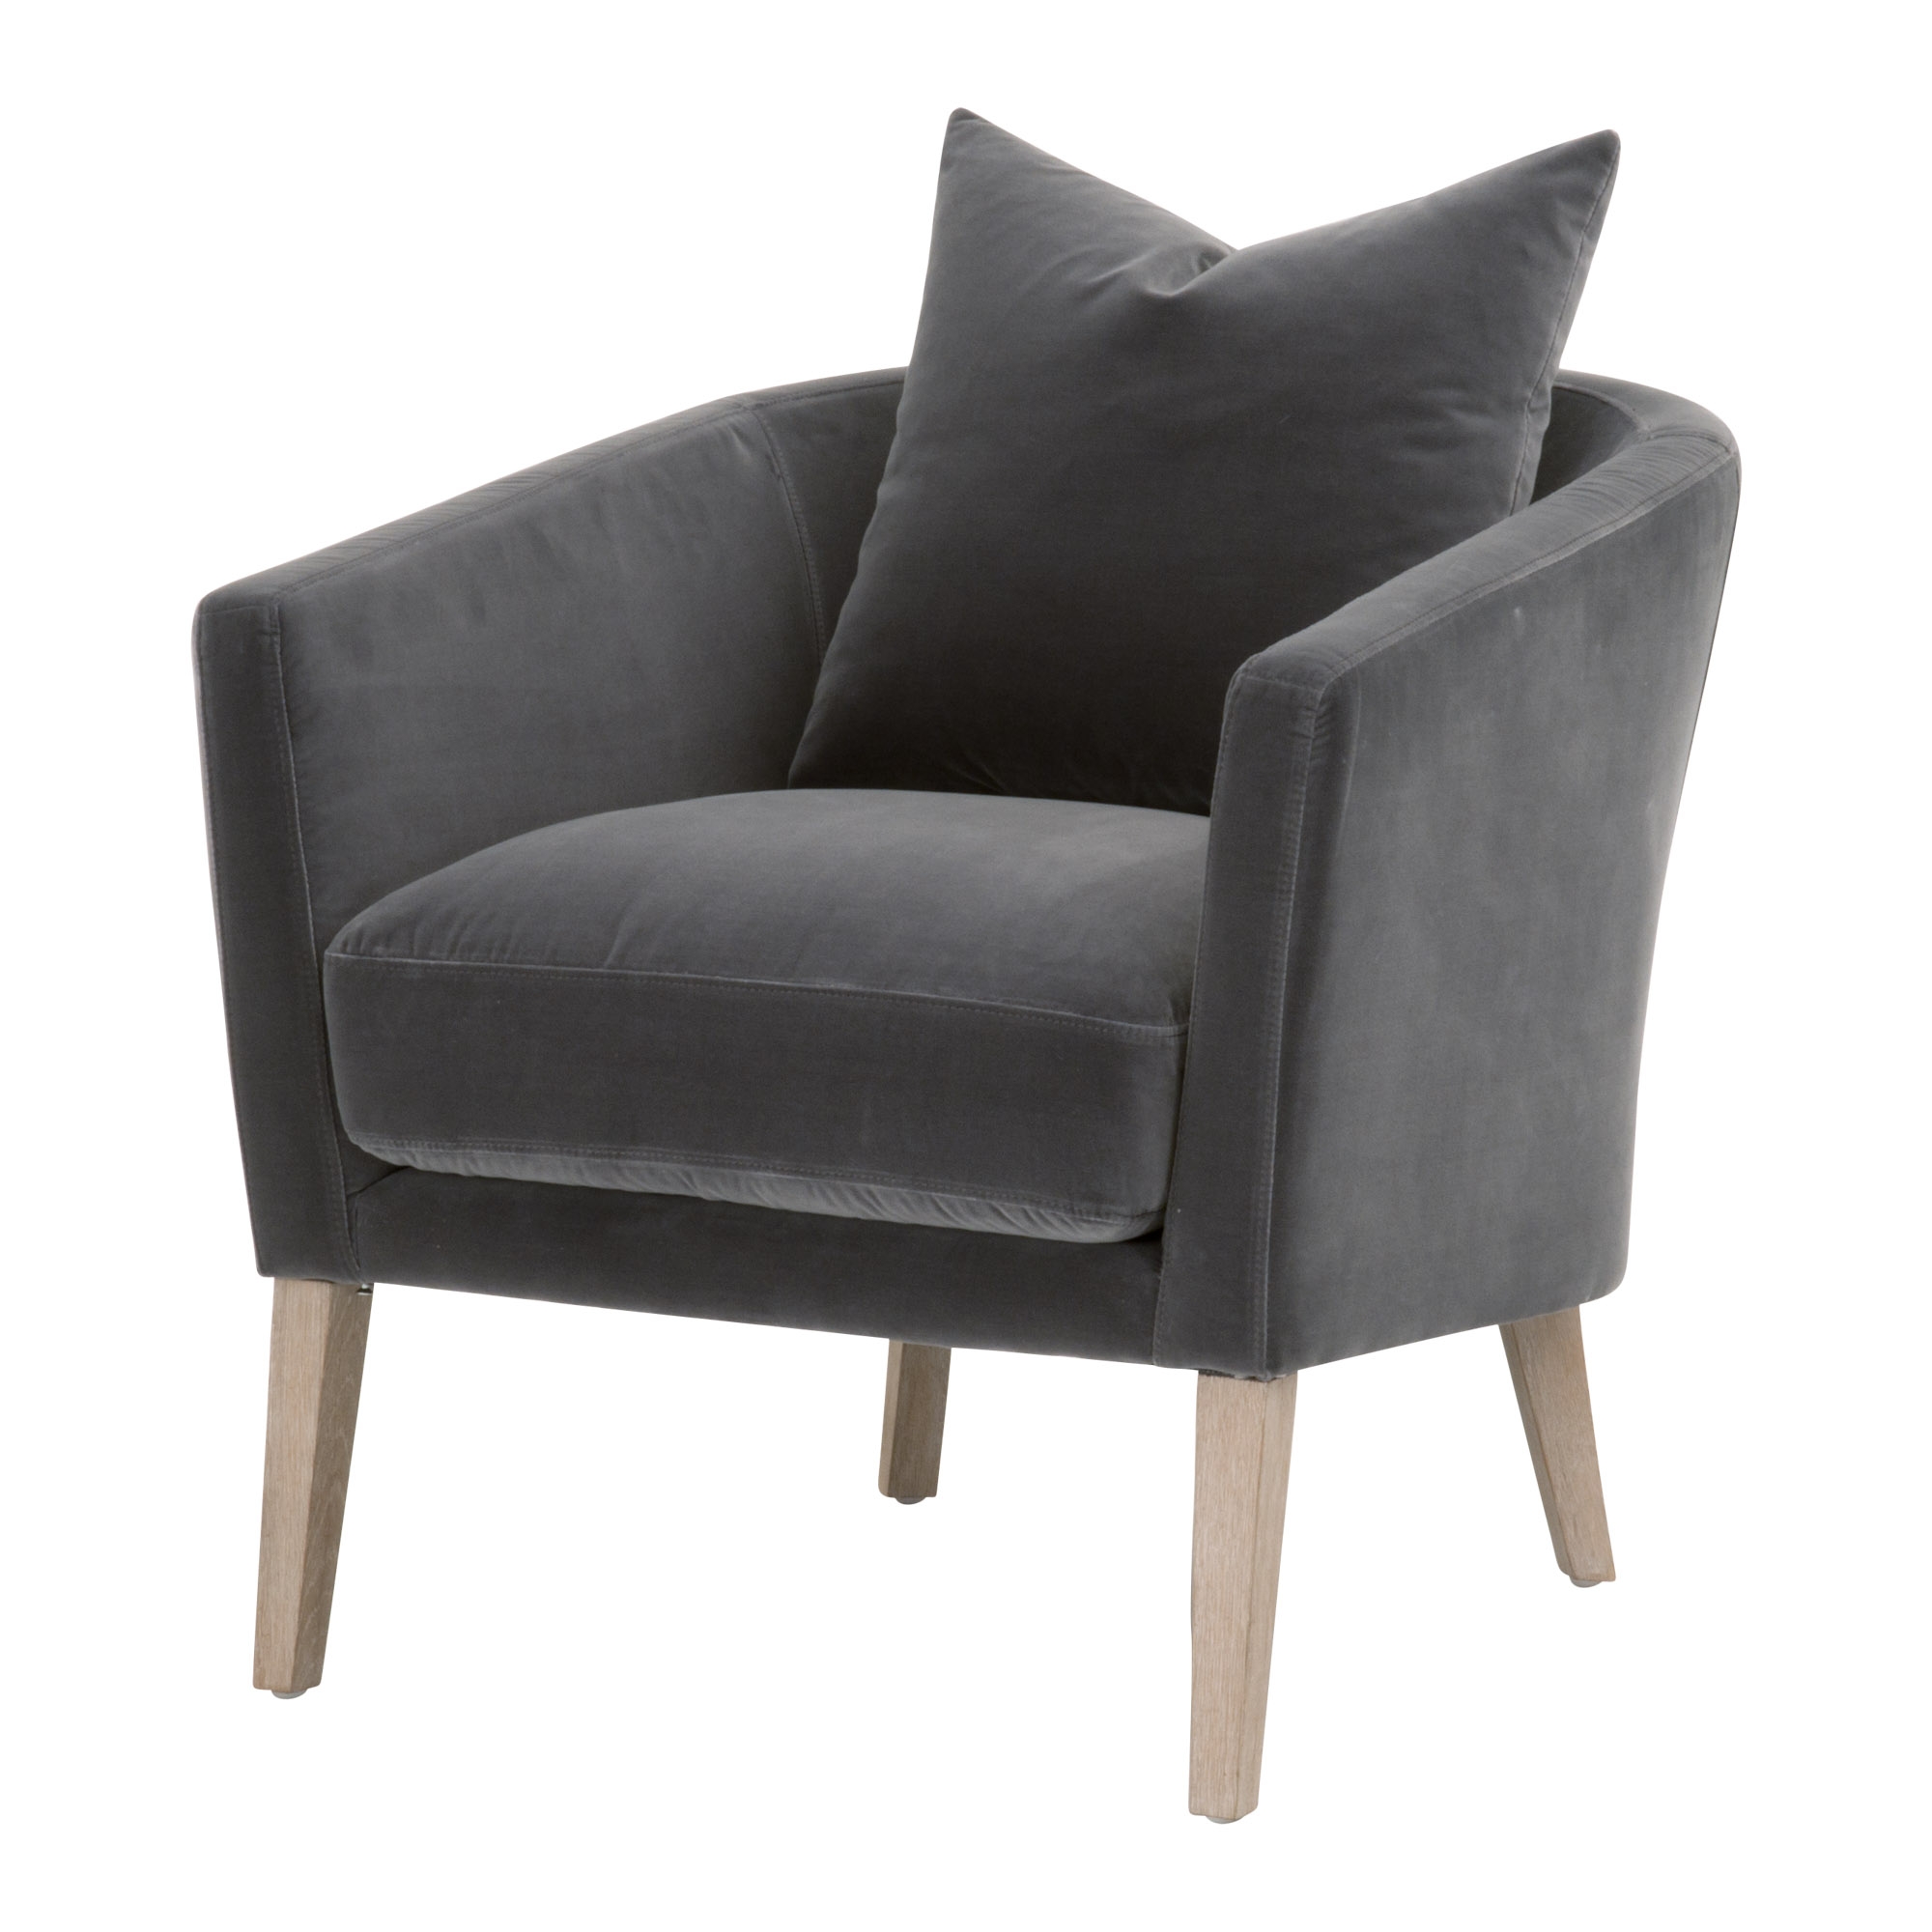 Indra Club Chair, Charcoal - Image 1